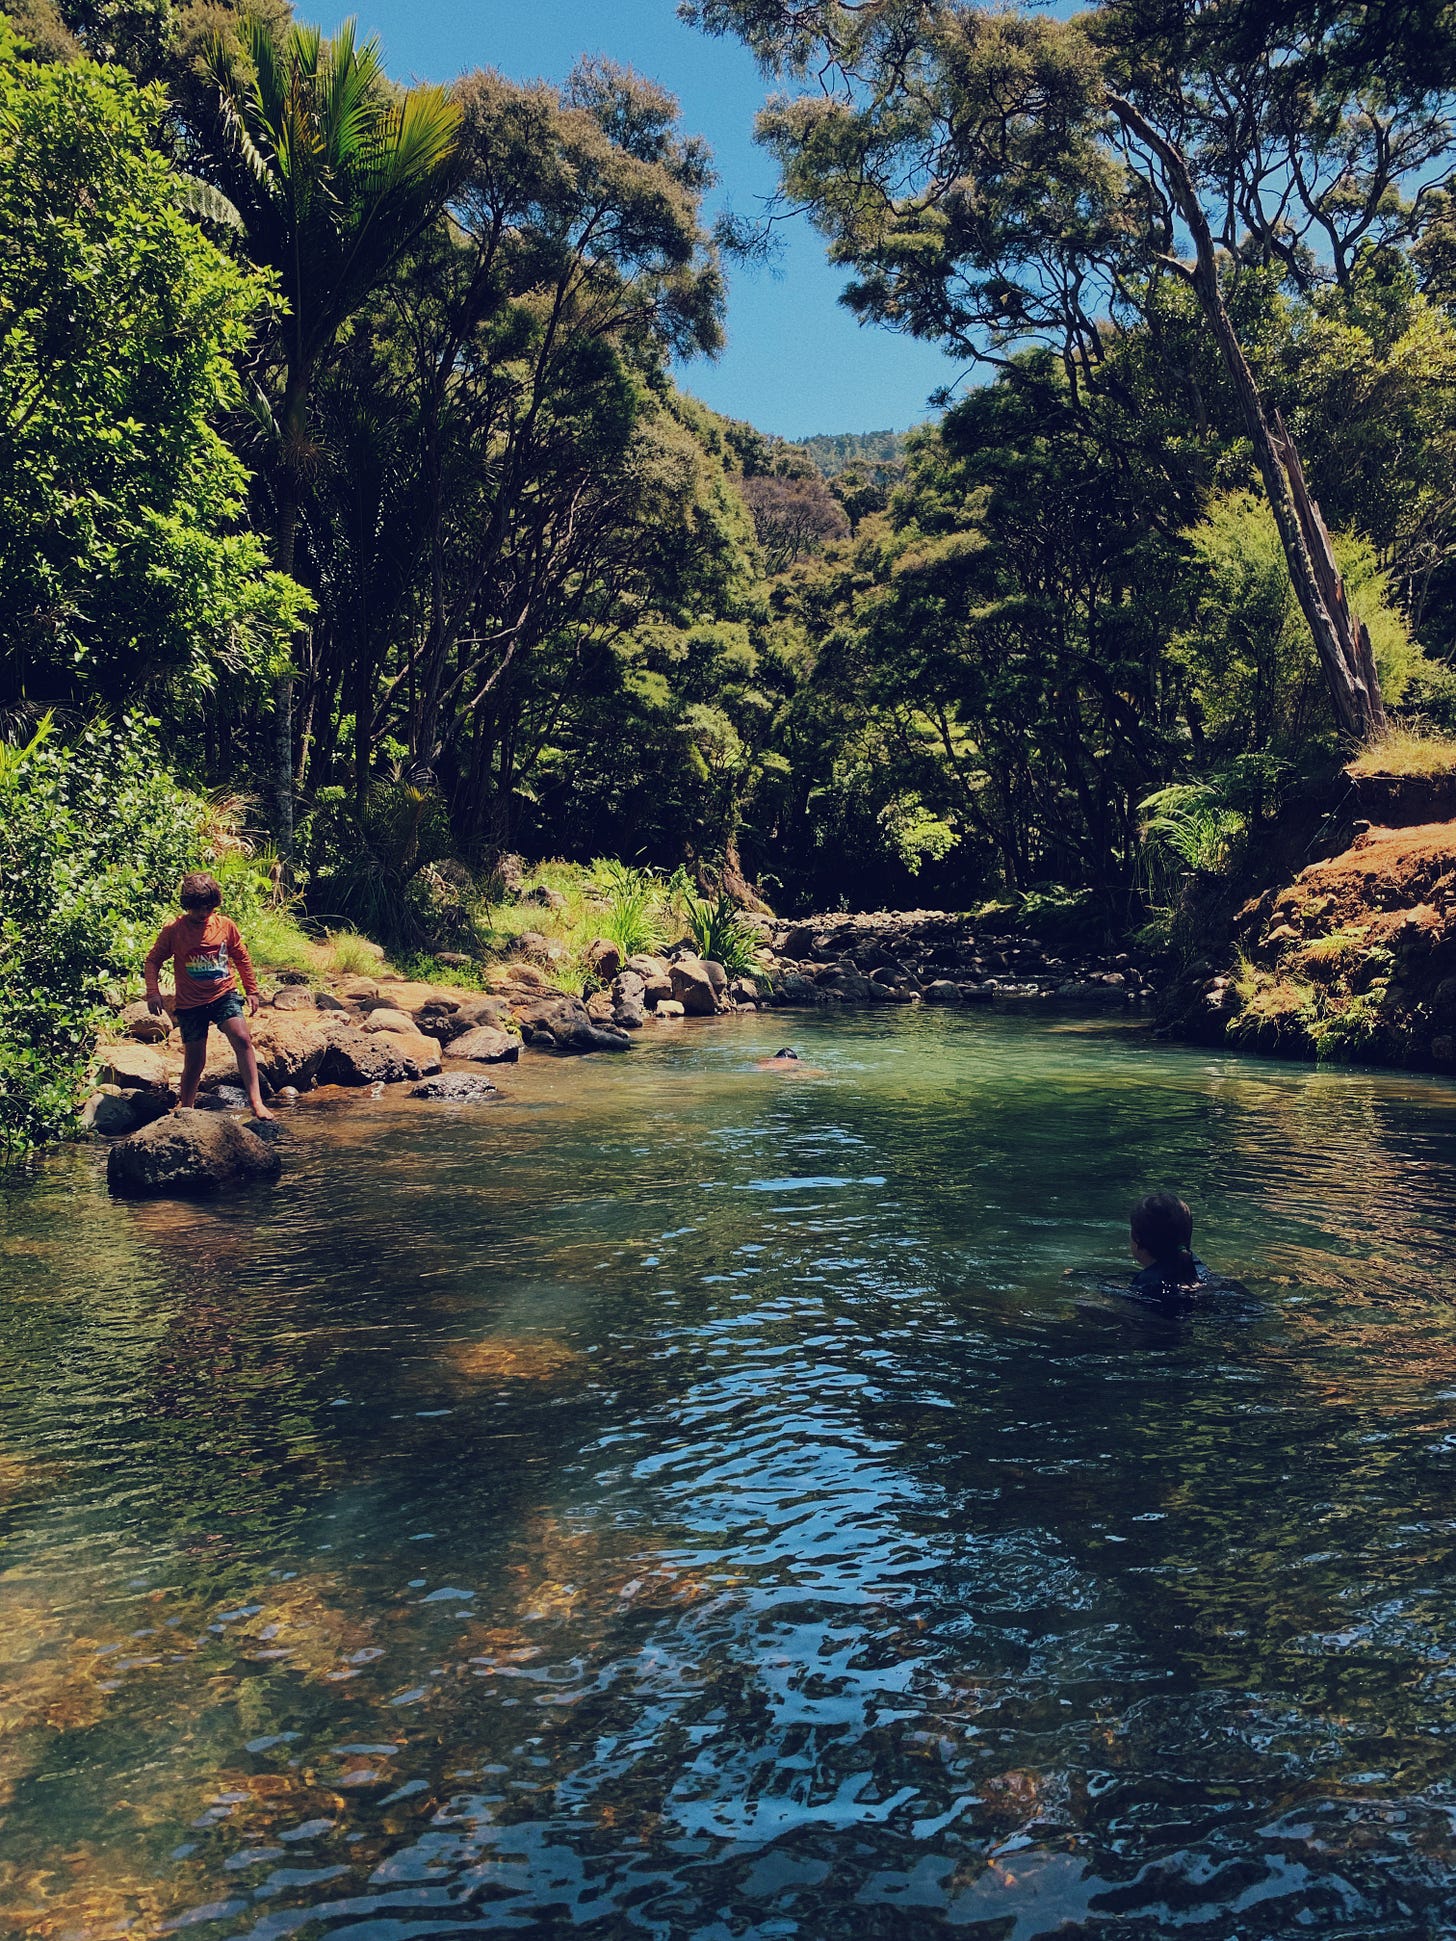 A sunlit blue-green river where children are swimming. The bush surrounds the river and blue sky is cloudless.